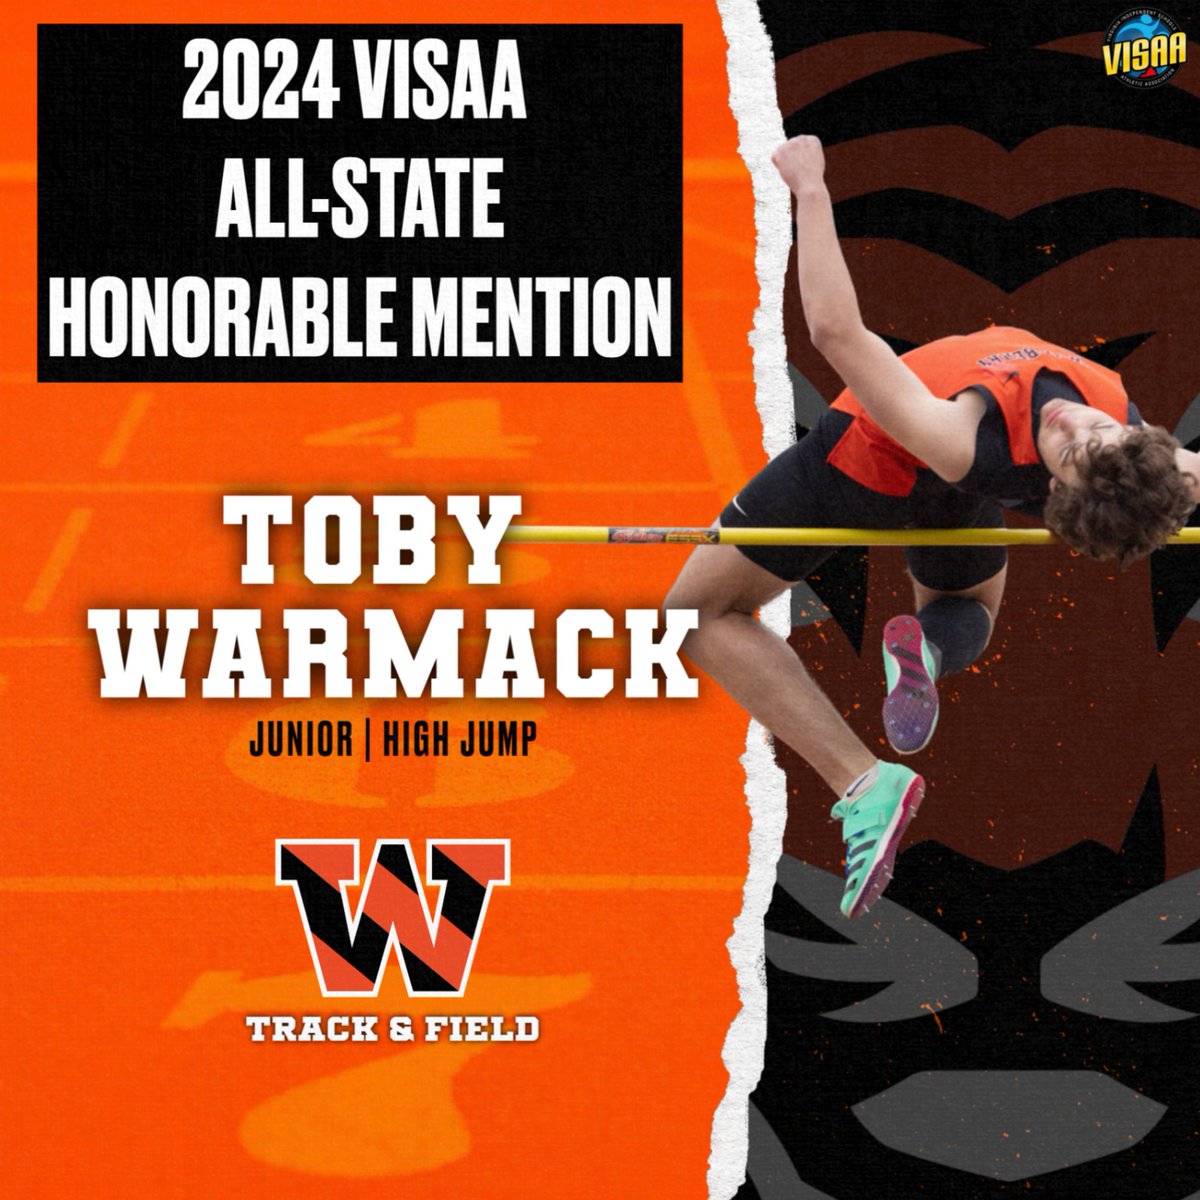 Congratulations to Toby Warmack '25 who achieved All-State honors yesterday at the VISAA State Track and Field Championships in the high jump!